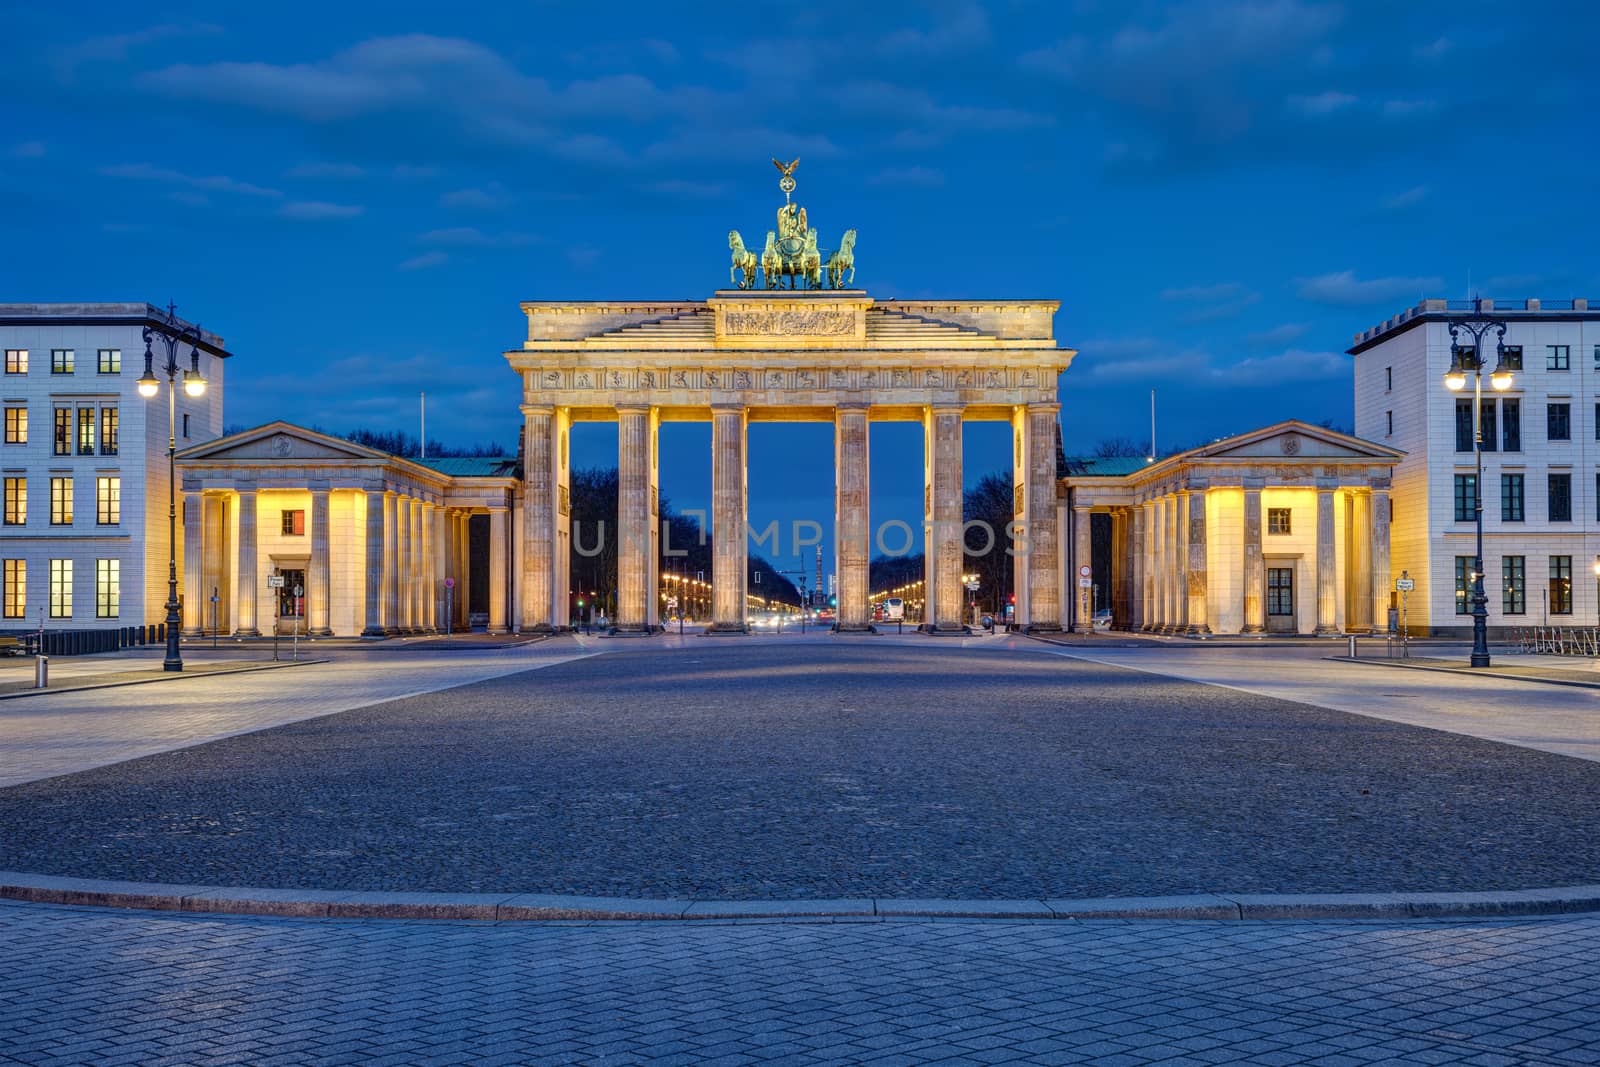 Panorama of the illuminated Brandenburger Tor in Berlin at dawn with no people